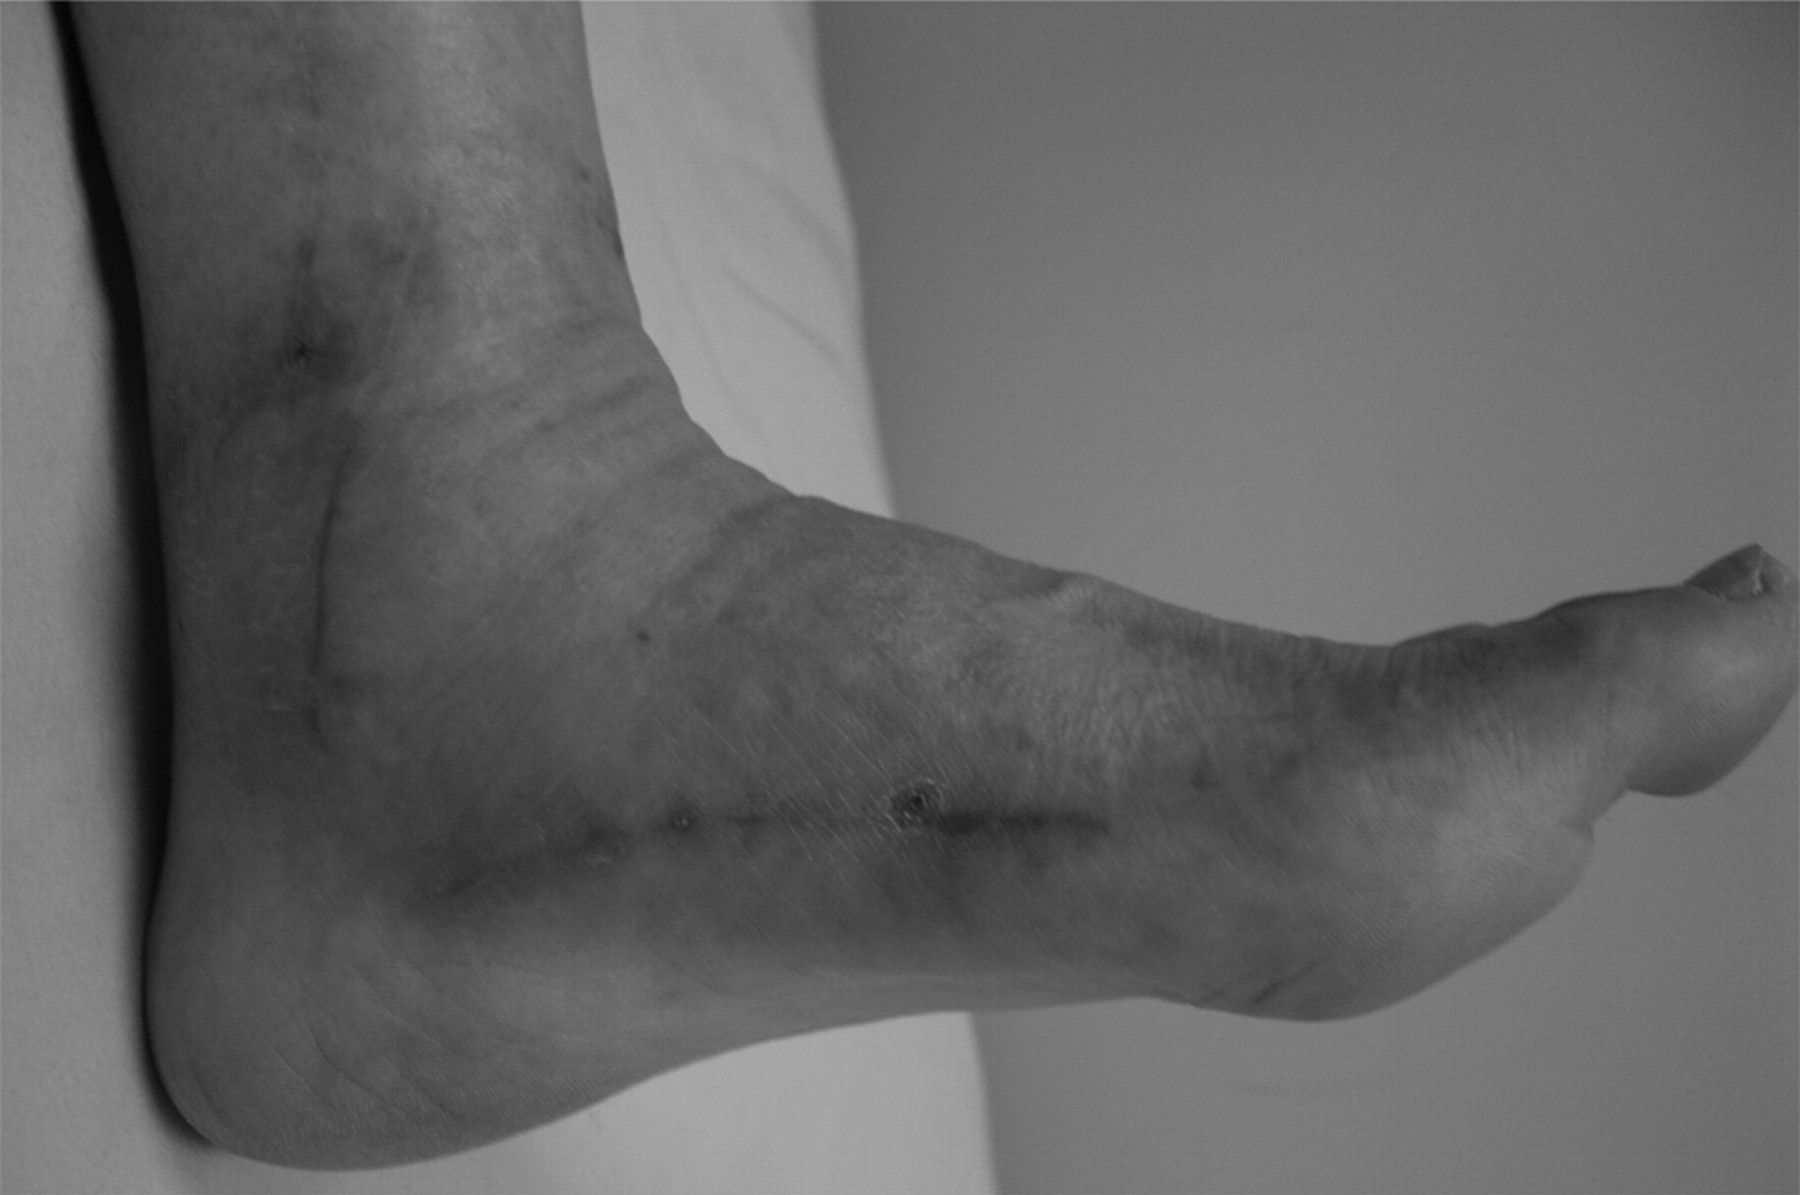 Fig. 1a, Fig. 1b, Fig. 1c, Fig. 1d  
            A 60-year-old woman with a checkrein deformity of the hallux, a) pre-operative radiograph showing a segmental fracture of the tibia and fibula, b) post-operative radiograph taken 22 months after the initial operation, c) the deformity recurred after release of adhesions and Z-plasty lengthening above the ankle at the fracture site. The checkrein deformity became more prominent when the ankle was passively dorsiflexed and d) correction after a second Z-plasty lengthening of the flexor hallucis longus tendon at the midfoot.
          